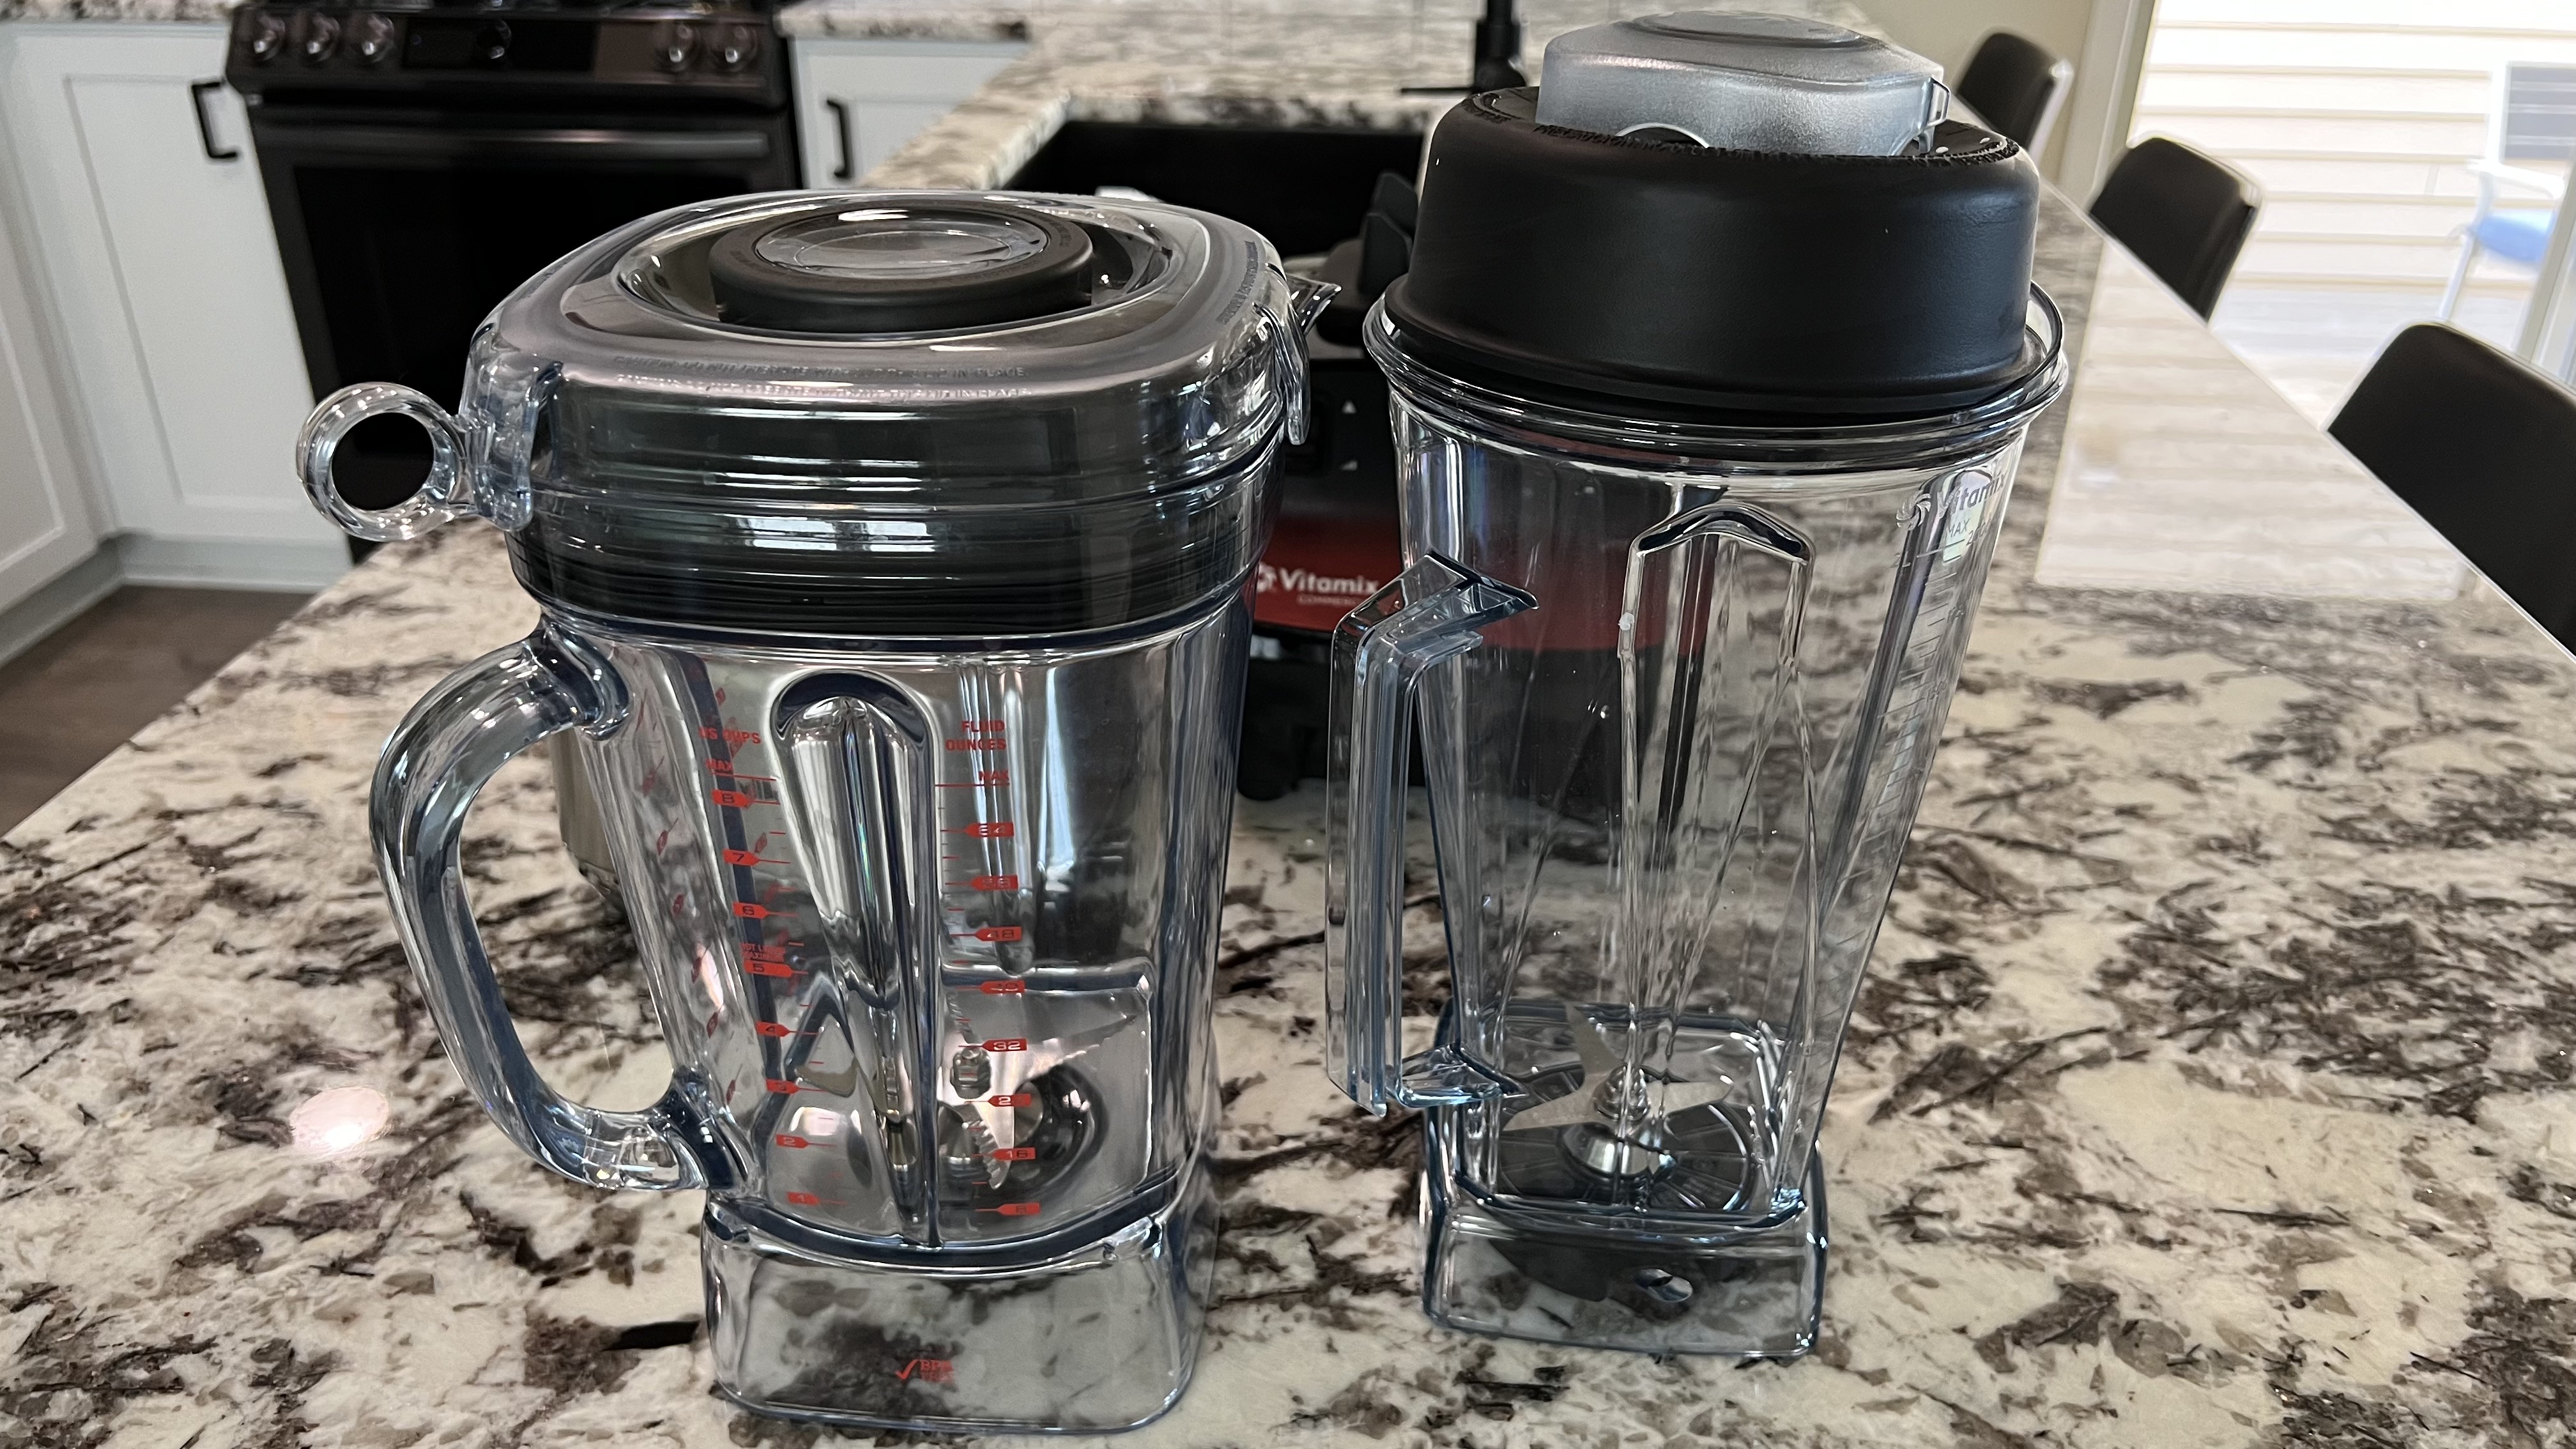 Breville and Vitamix jugs